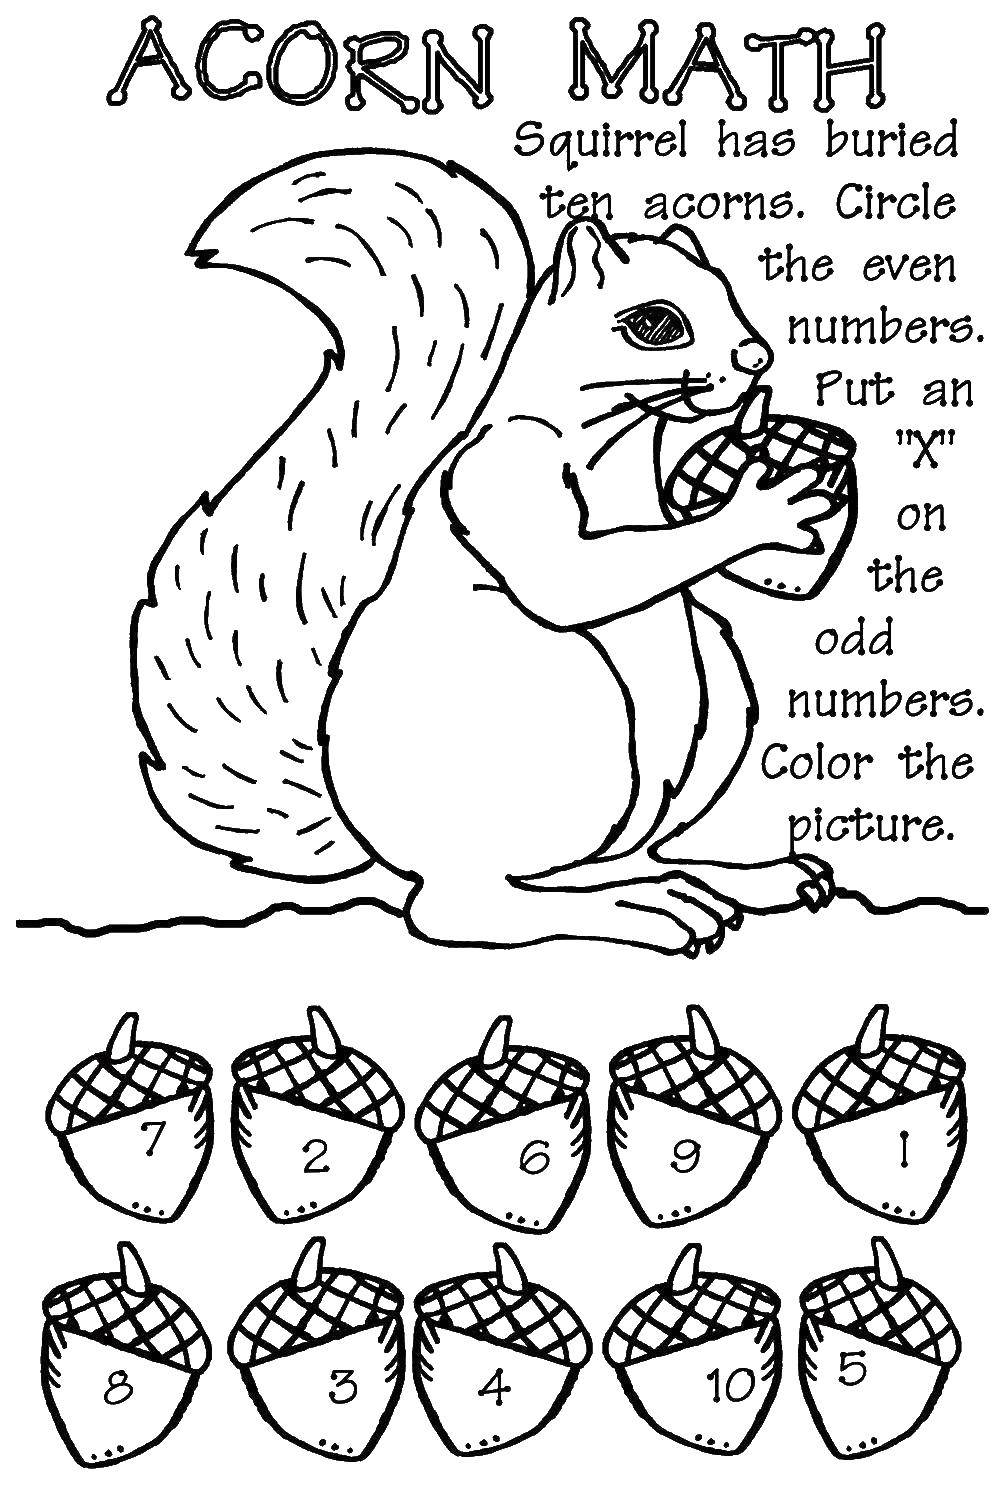 Coloring English puzzle about the squirrel and the even and odd numbers. Category English. Tags:  protein .